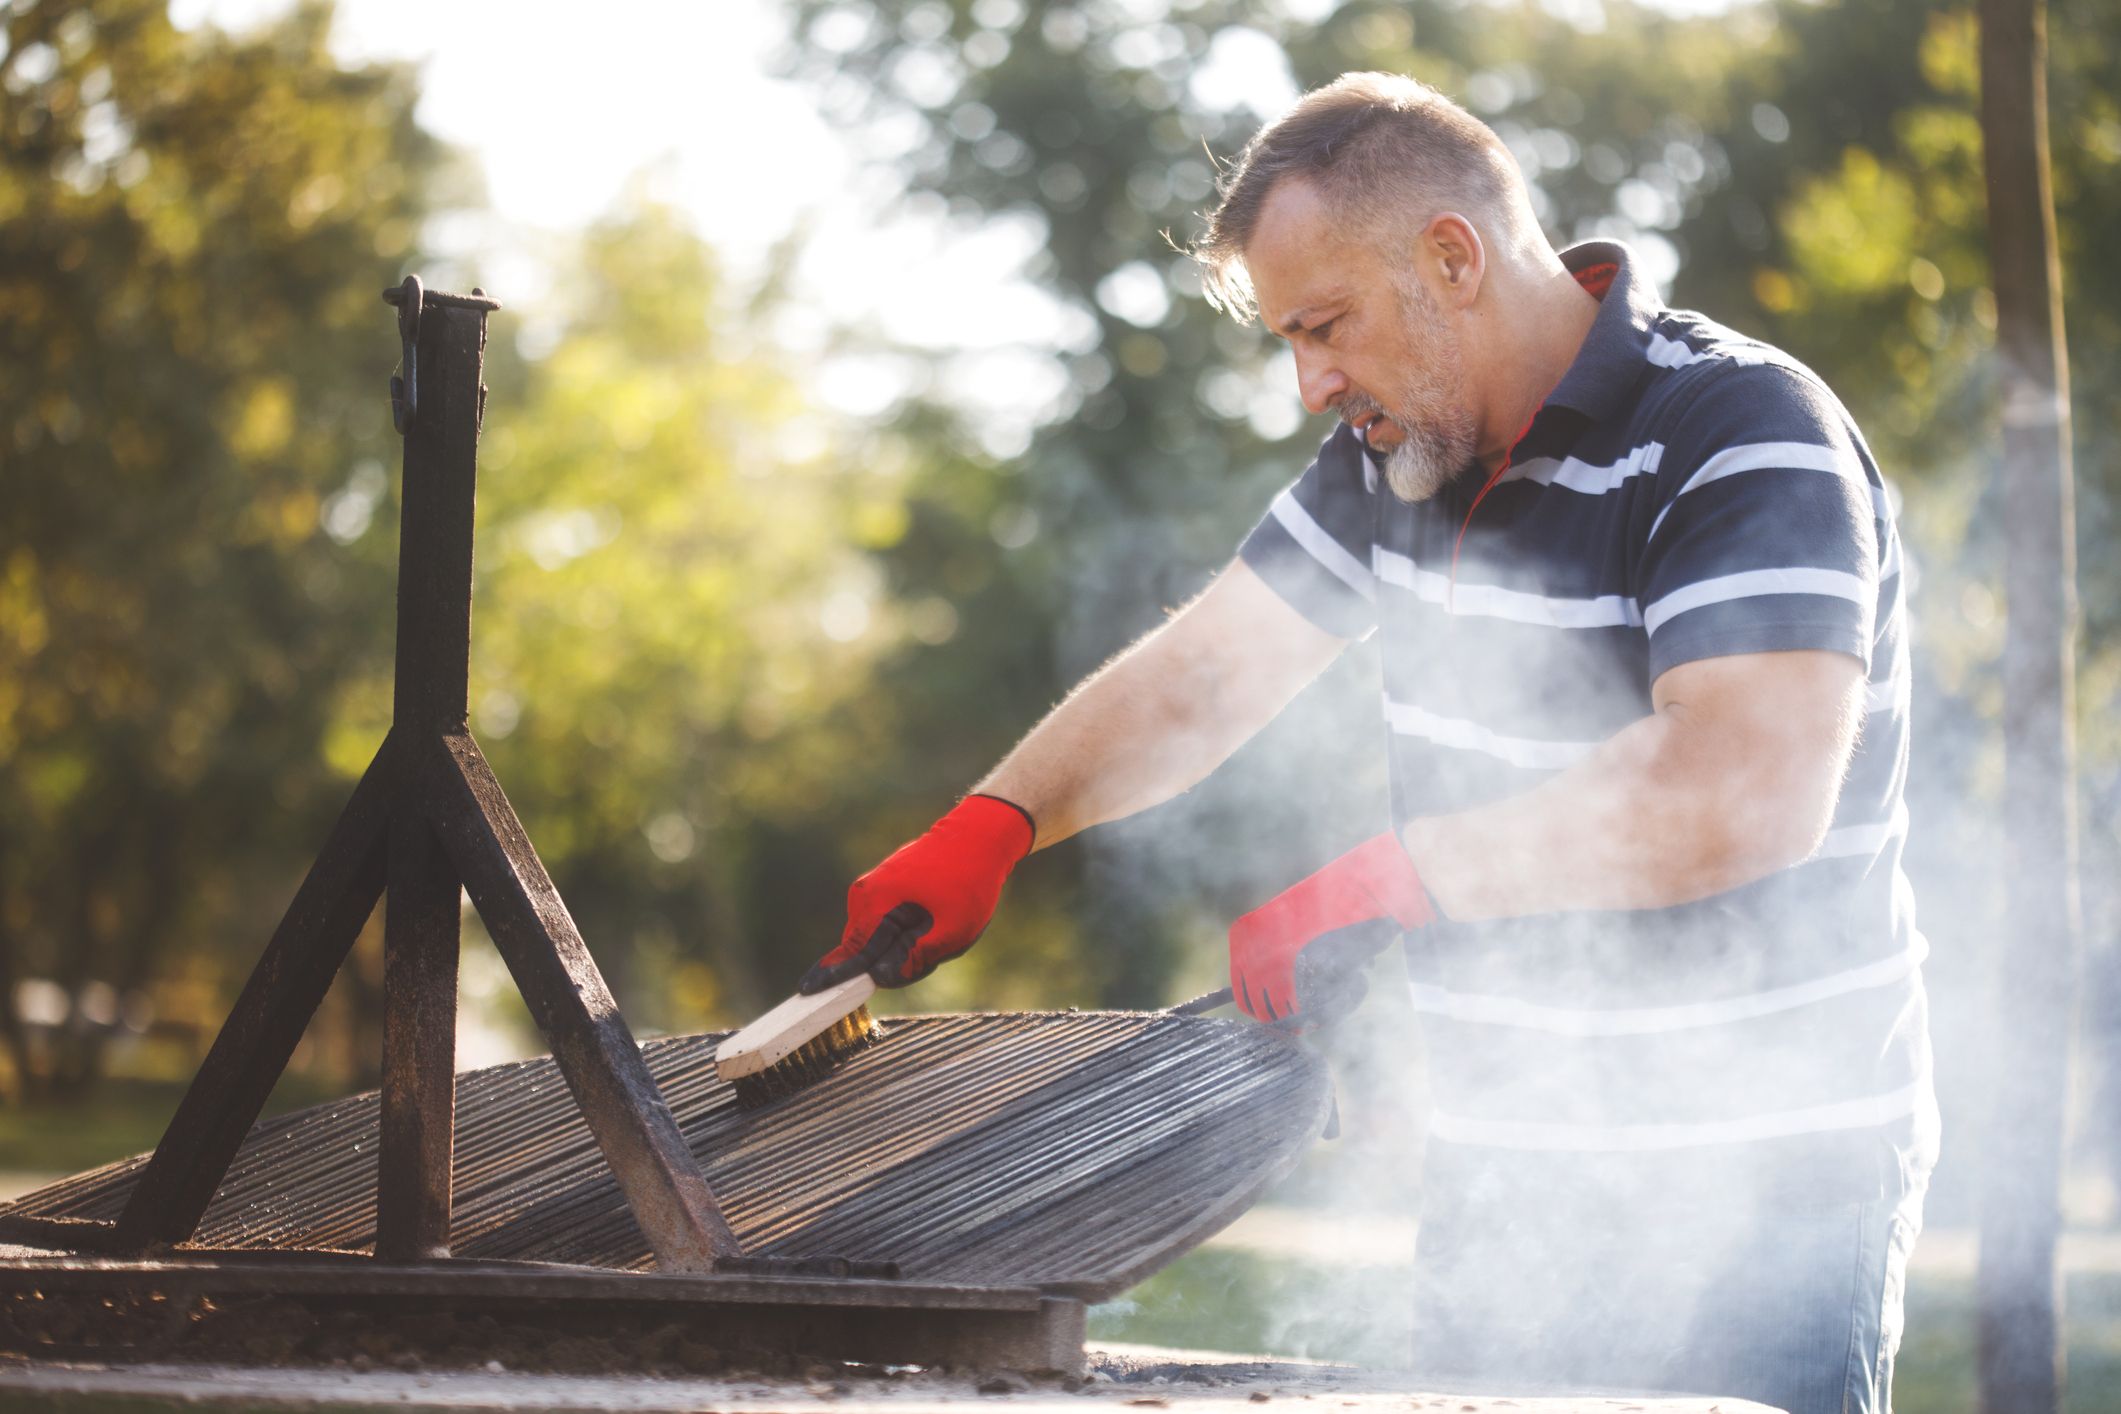 How to Clean a Grill, According to an Award-Winning Pitmaster